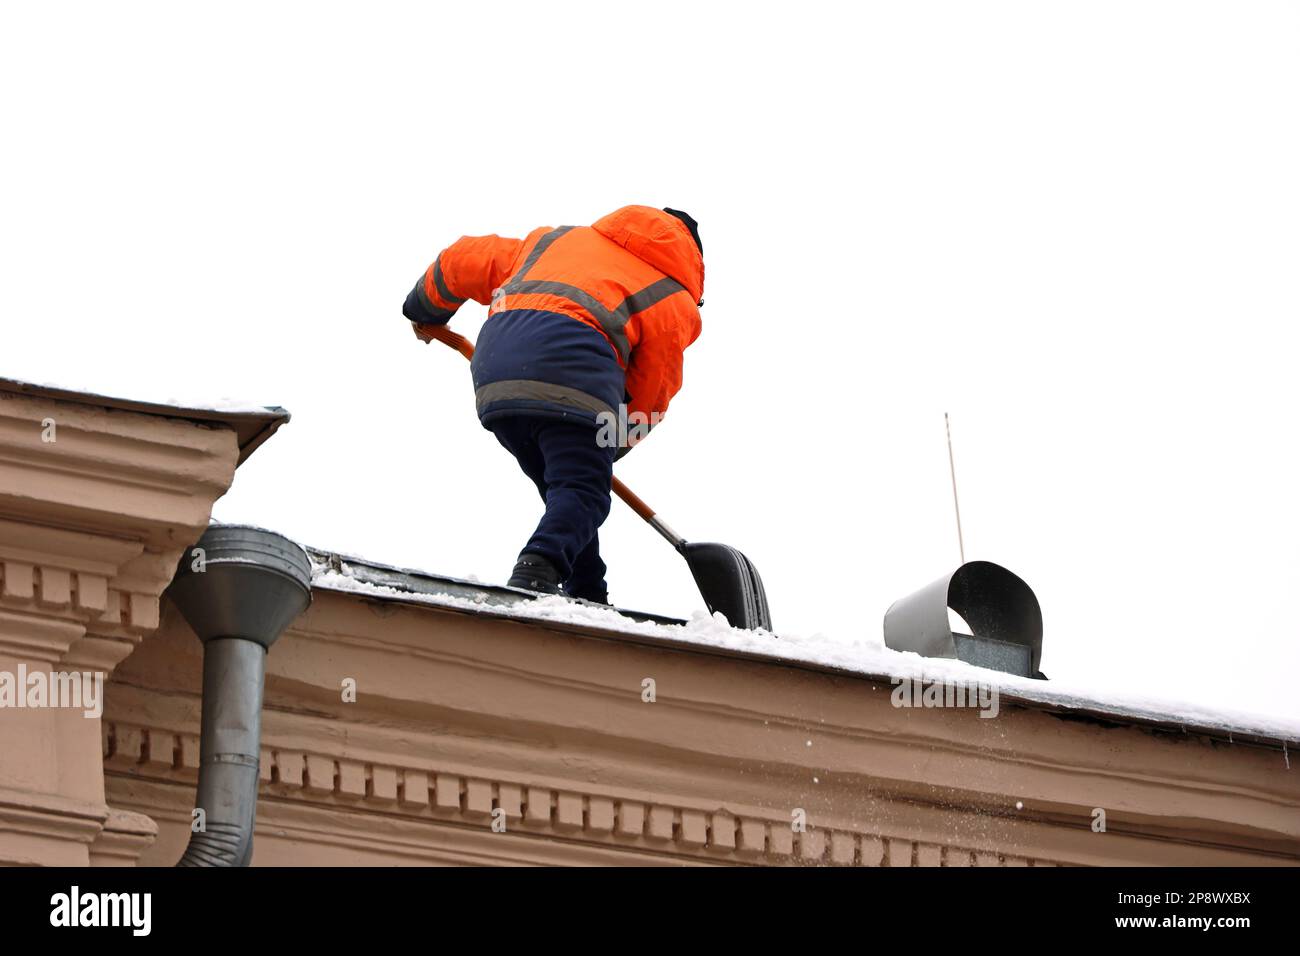 Worker removing snow on the roof of a building. Snow removal, climber cleaning roof in winter or early spring Stock Photo